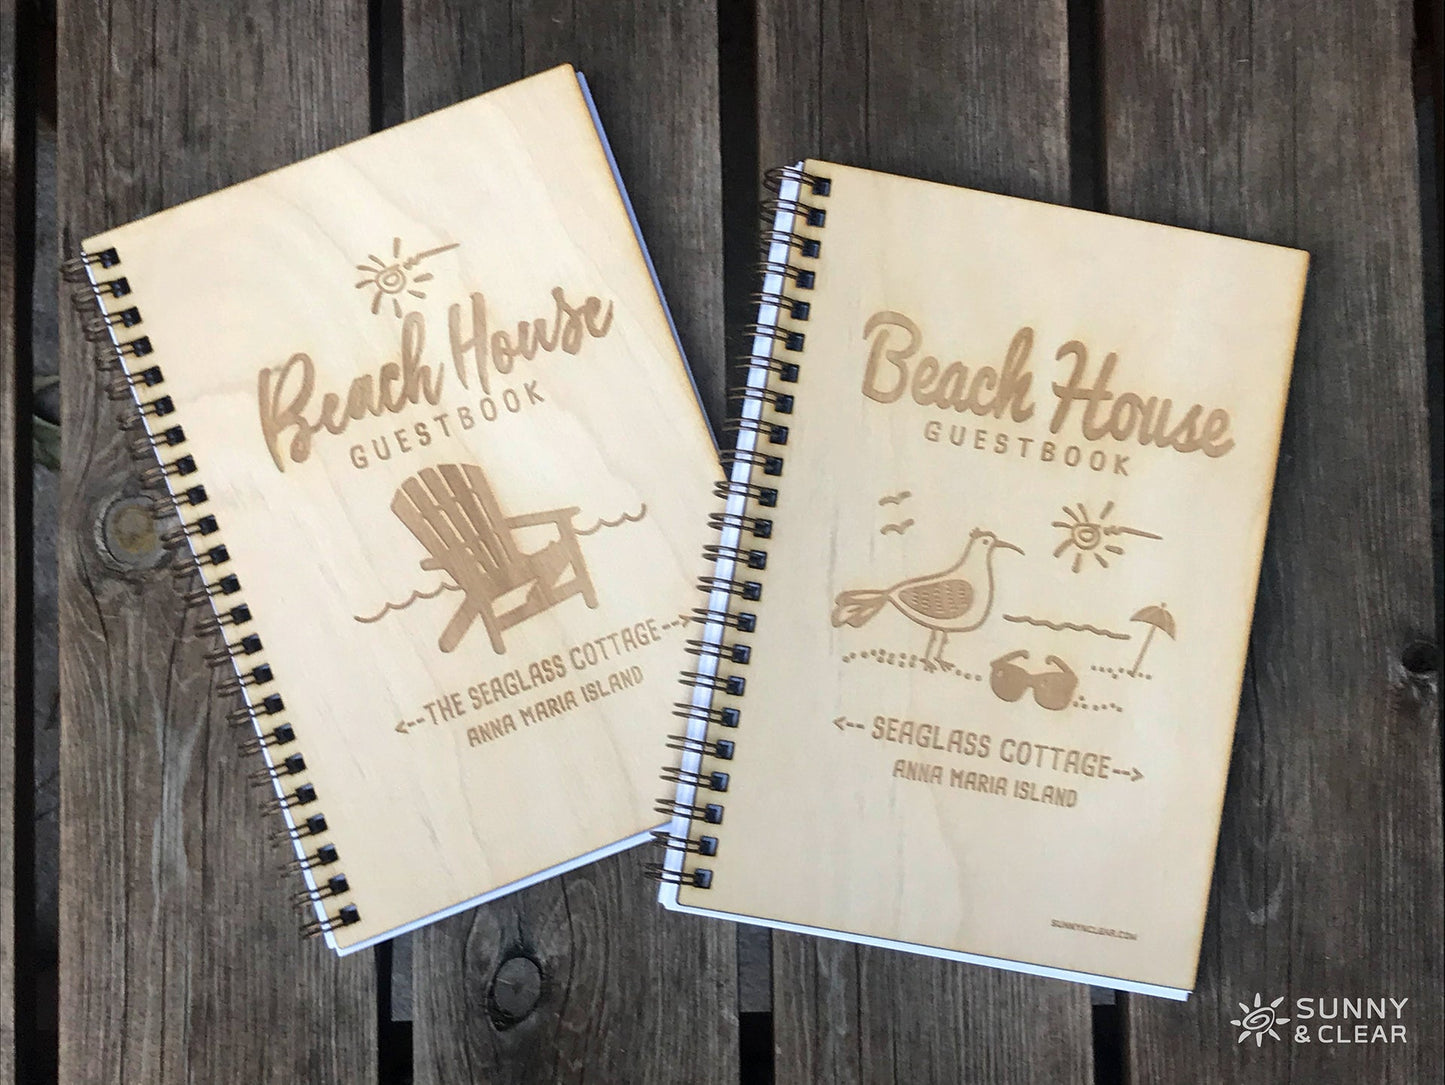 Beach House Guest Book, Crab, Coastal, AirBNB, Personalized